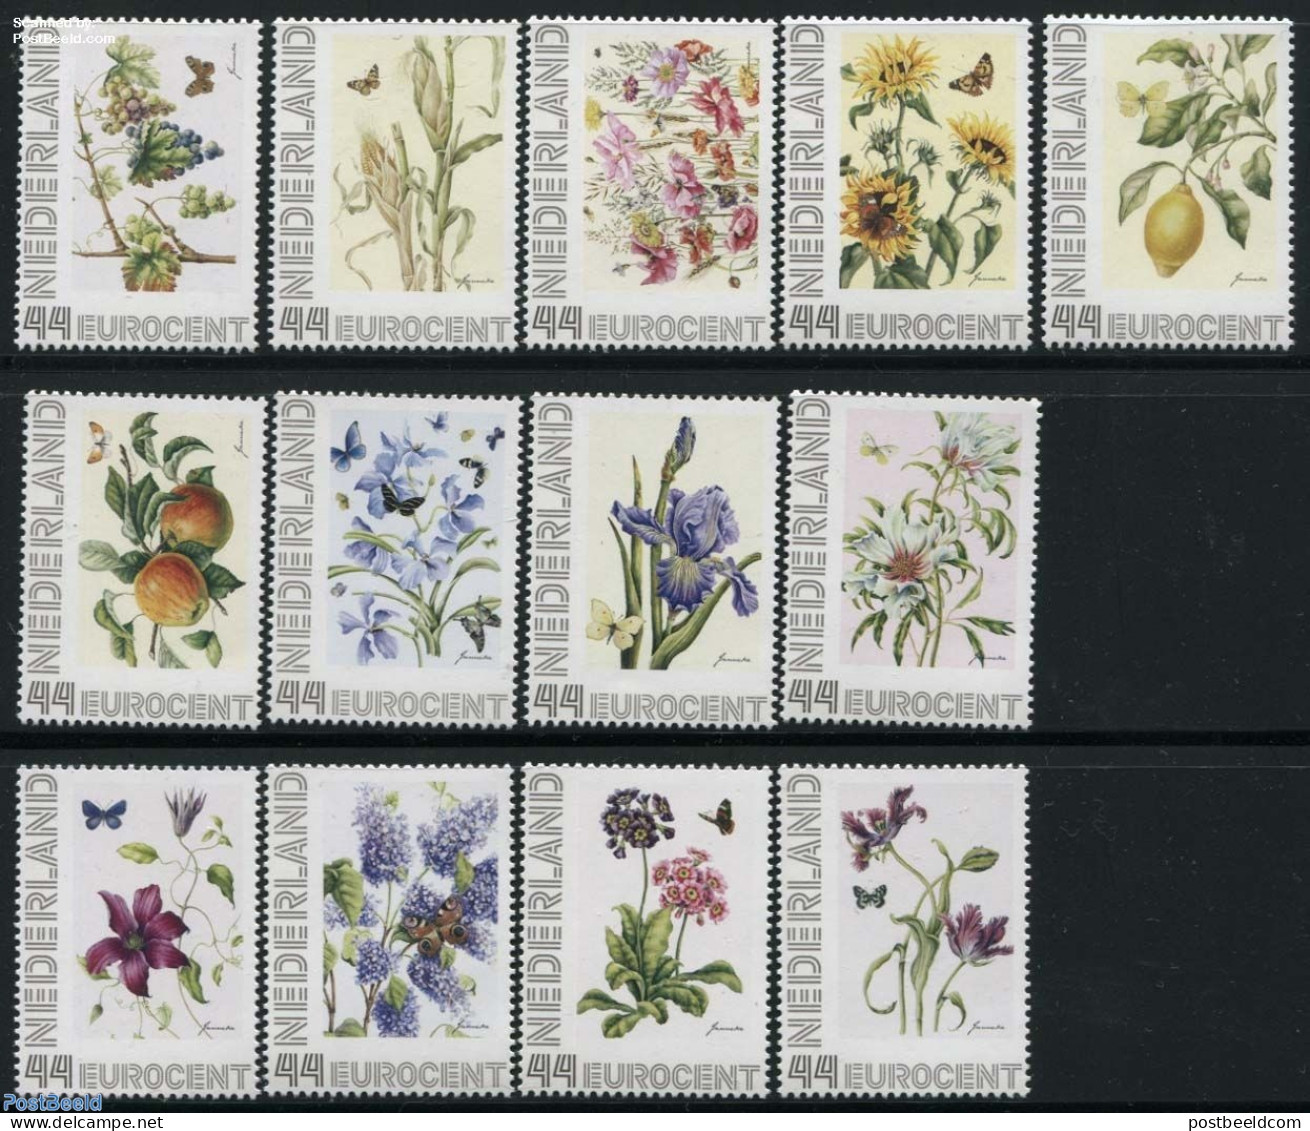 Netherlands - Personal Stamps TNT/PNL 2008 Flowers, Janneke Brinkman, Only Stamps With Butterflies 13v, Mint NH, Natur.. - Wijn & Sterke Drank